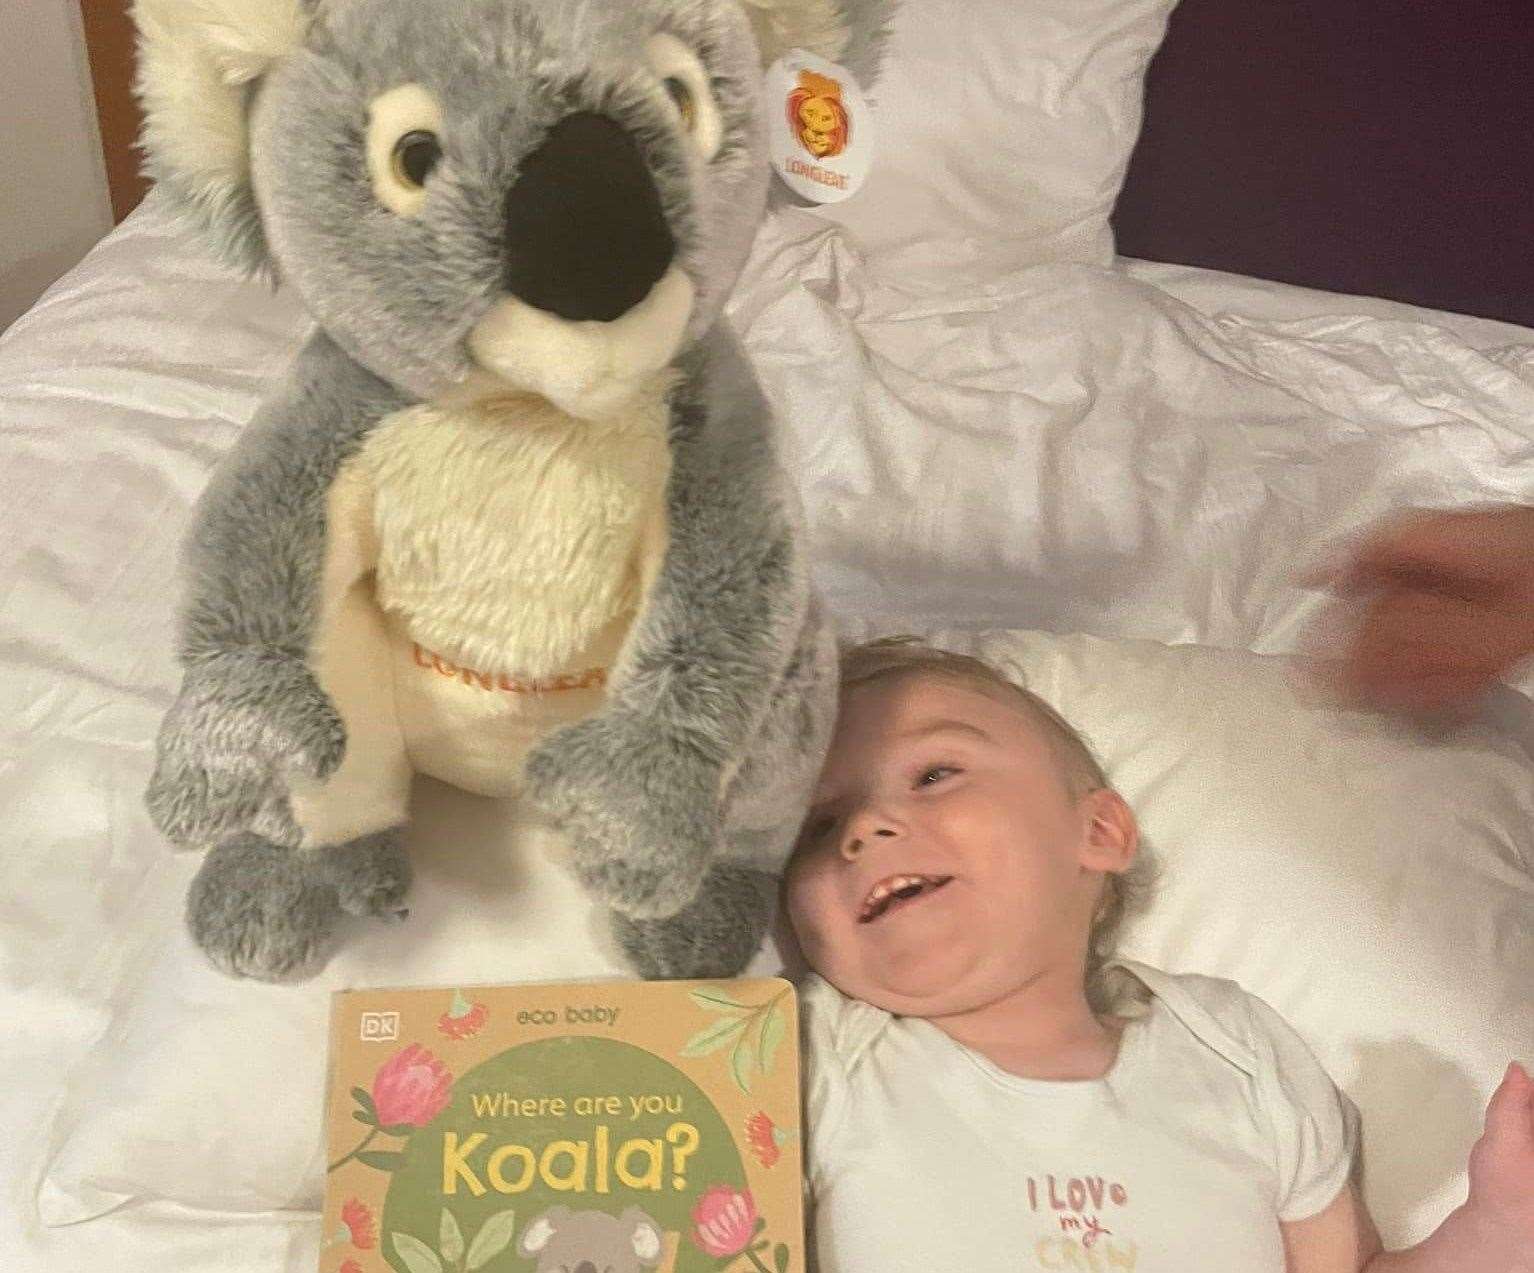 Thomas and his brothers were gifted a cuddly koala bear and other toys during their stay. Picture: Jasmine Legg